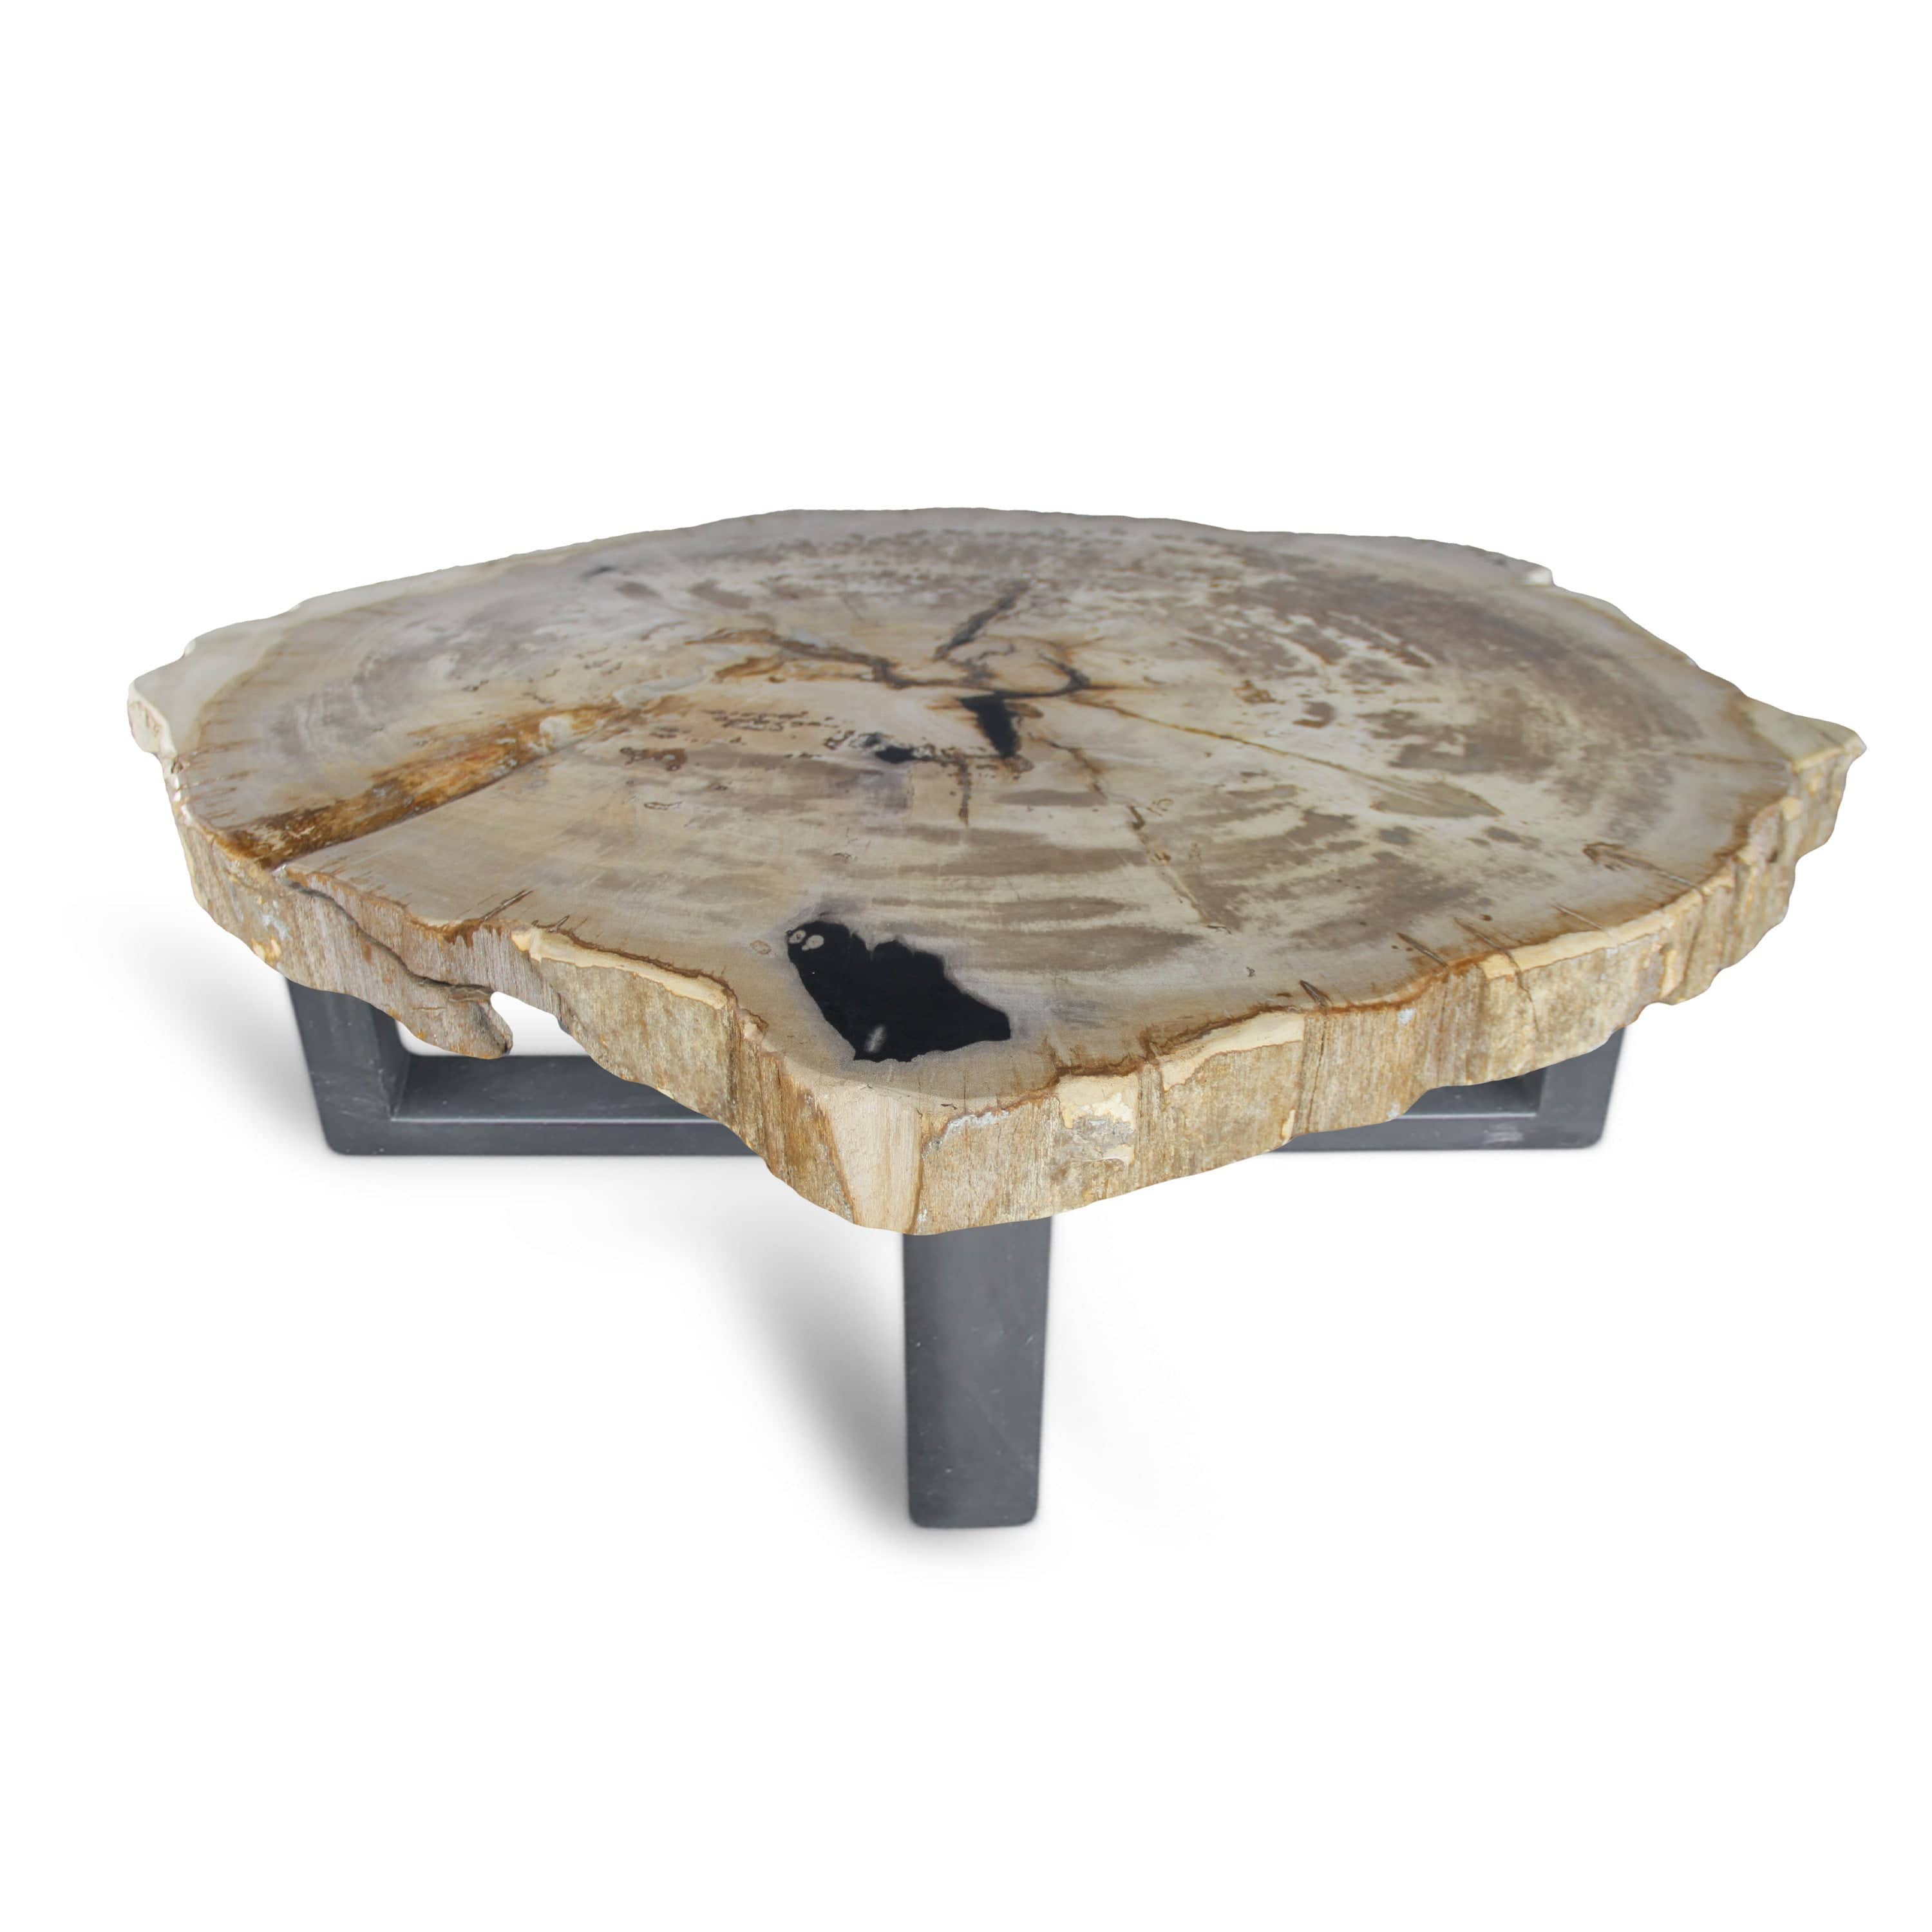 Kalifano Petrified Wood Petrified Wood Round Slab Coffee Table from Indonesia - 39" / 180 lbs PWT6600.002